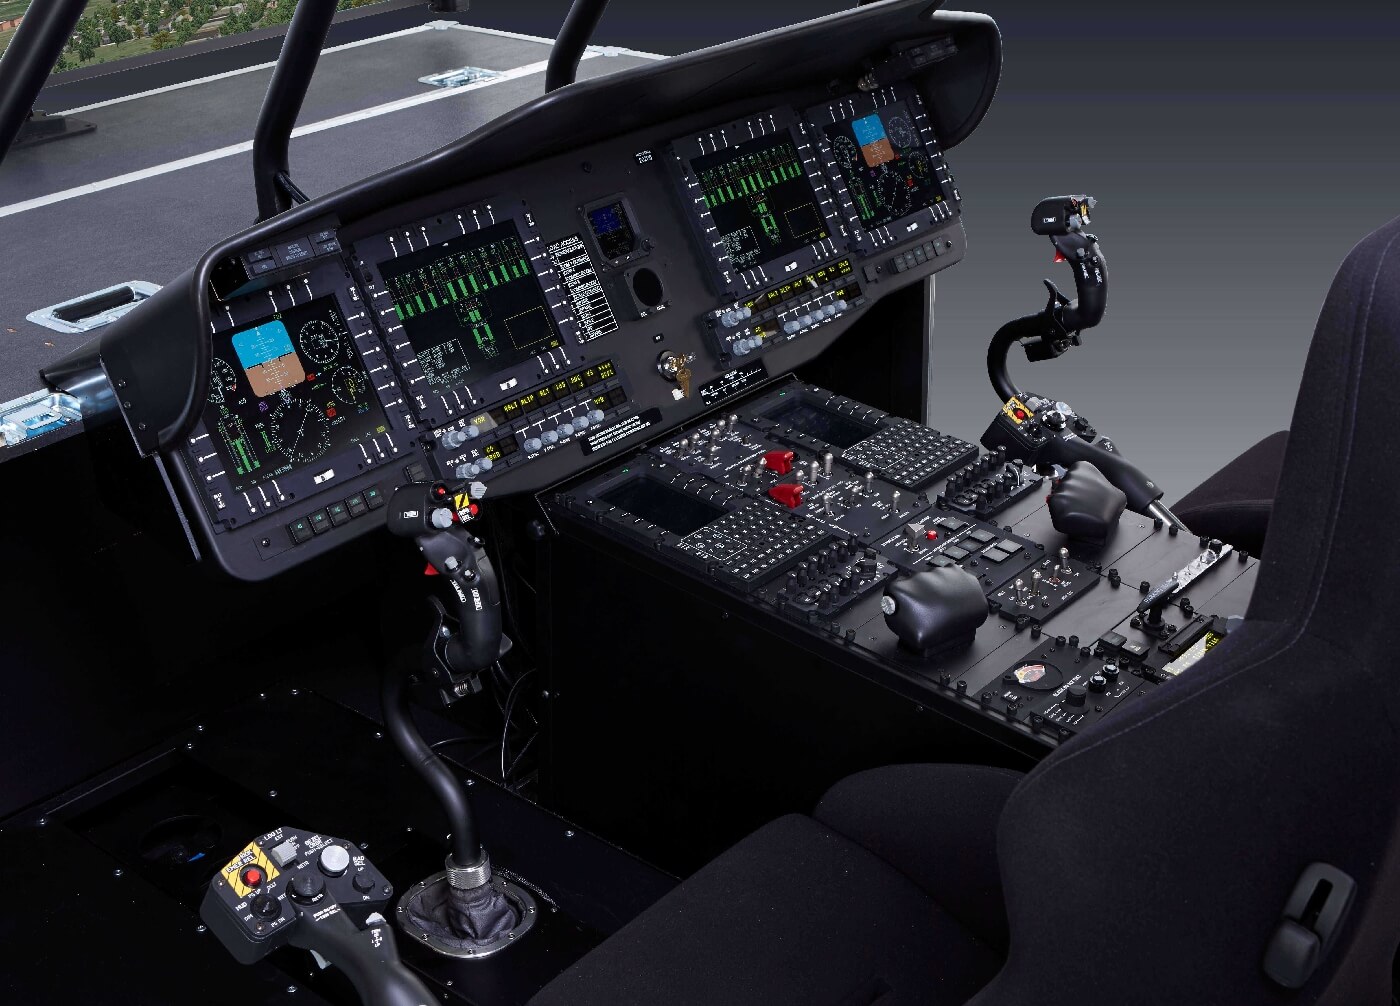 SGB will provide its proven cockpit avionics procedural tool with visual and flight control systems; and Stirling will be responsible for supplying seven cockpit control sets and spares. Each set includes both pilot and co-pilot controls, which include active cyclics, collectives and pedals. Stirling Photo